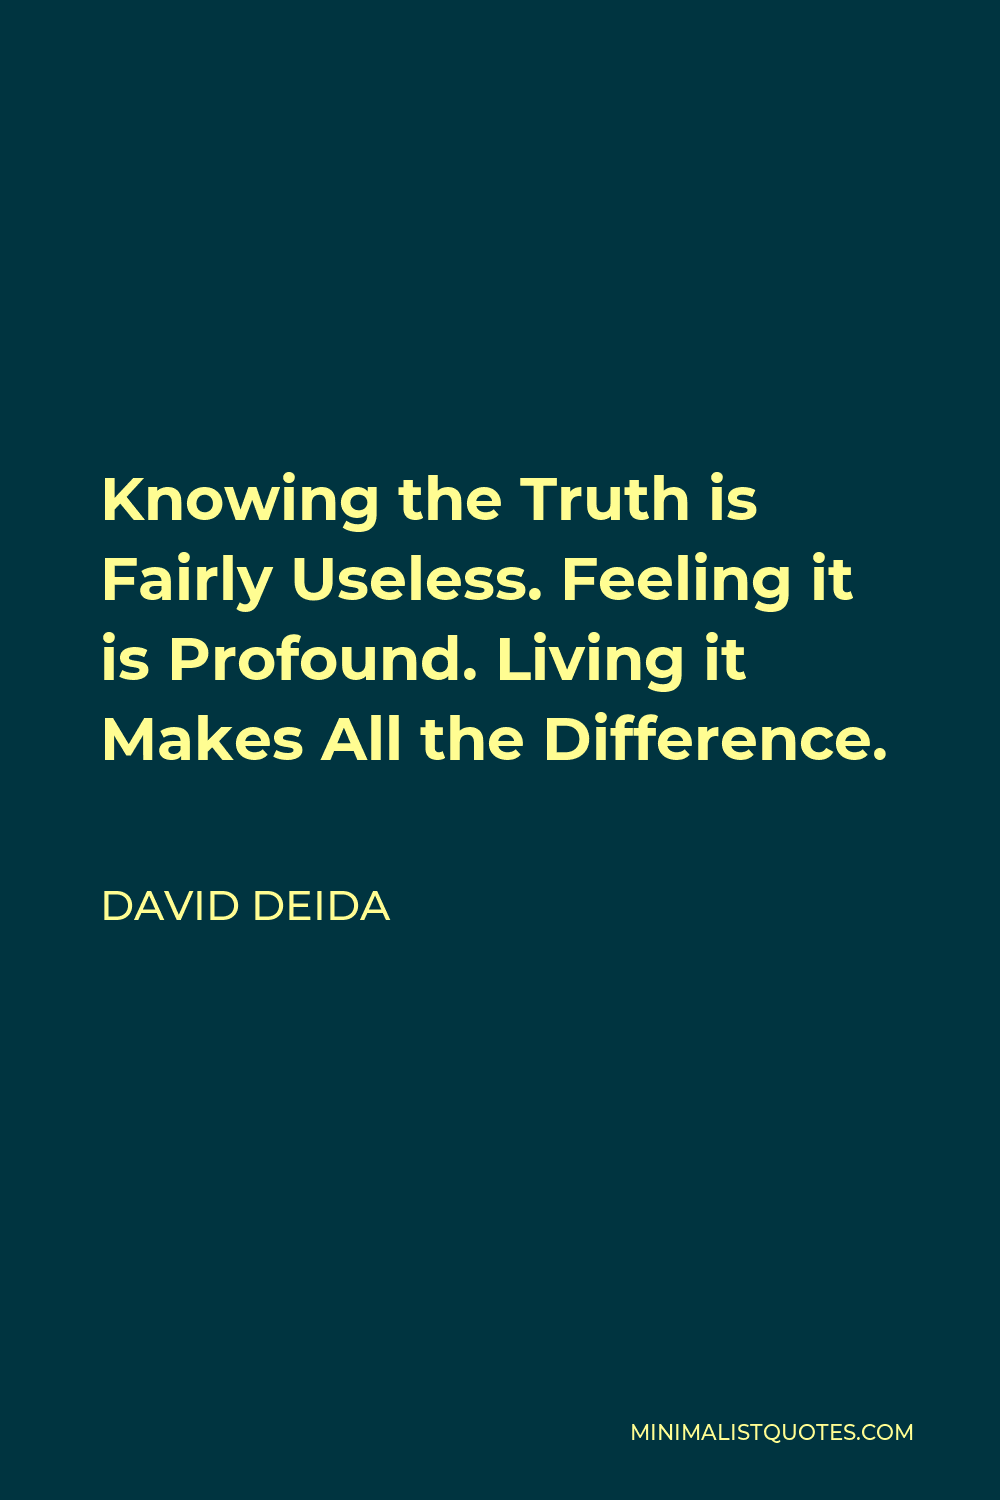 David Deida Quote - Knowing the Truth is Fairly Useless. Feeling it is Profound. Living it Makes All the Difference.